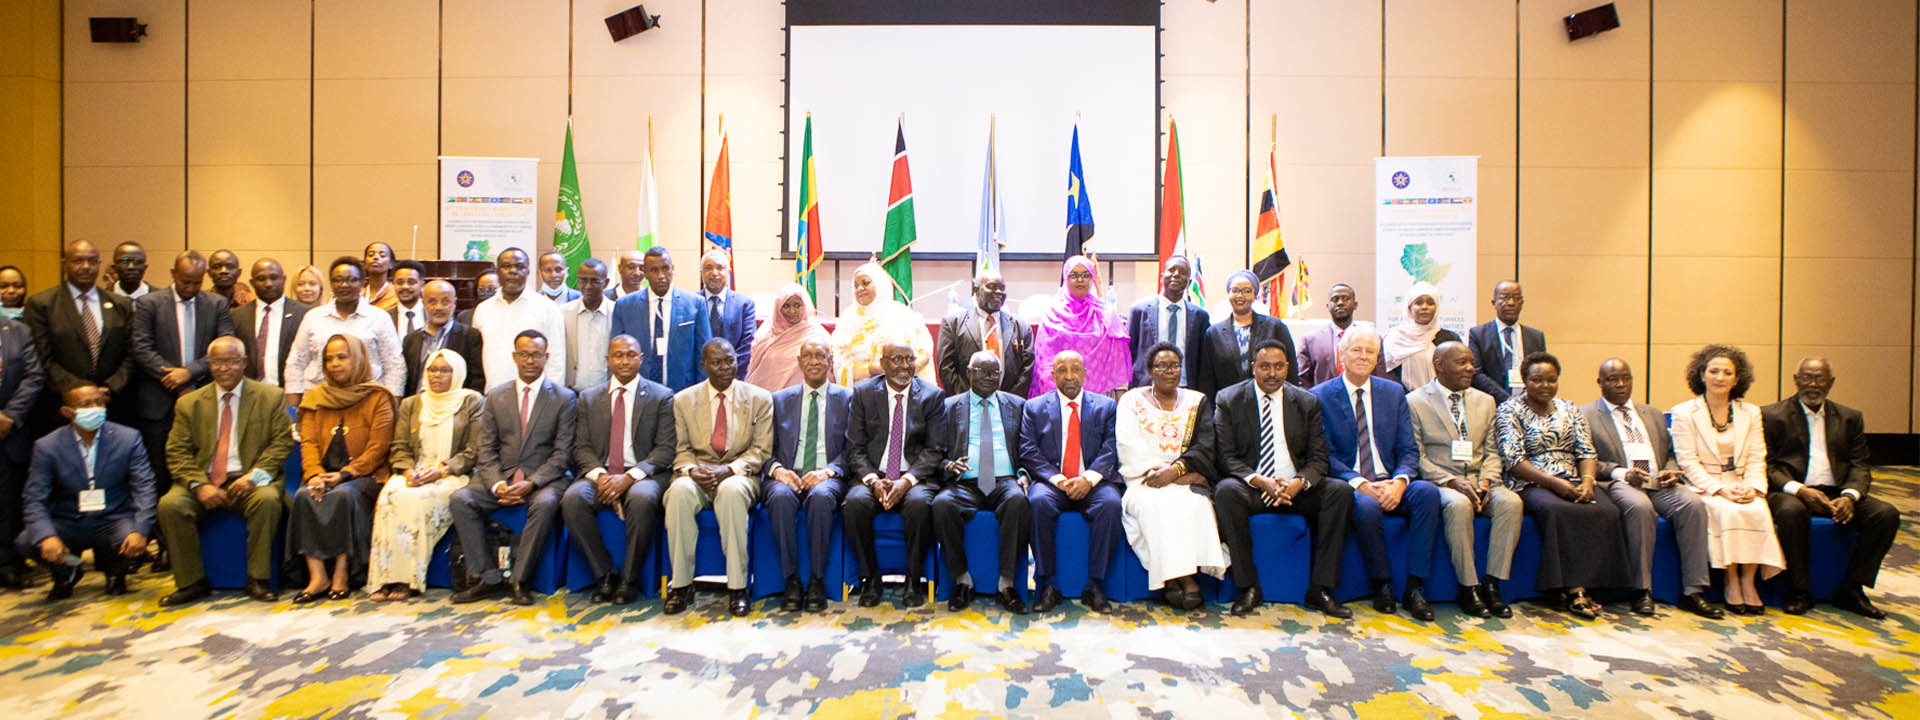 IGAD Education Ministers Commit To Accelerate Access To Education For Refugees, Returnees, IDPs And Host Communities